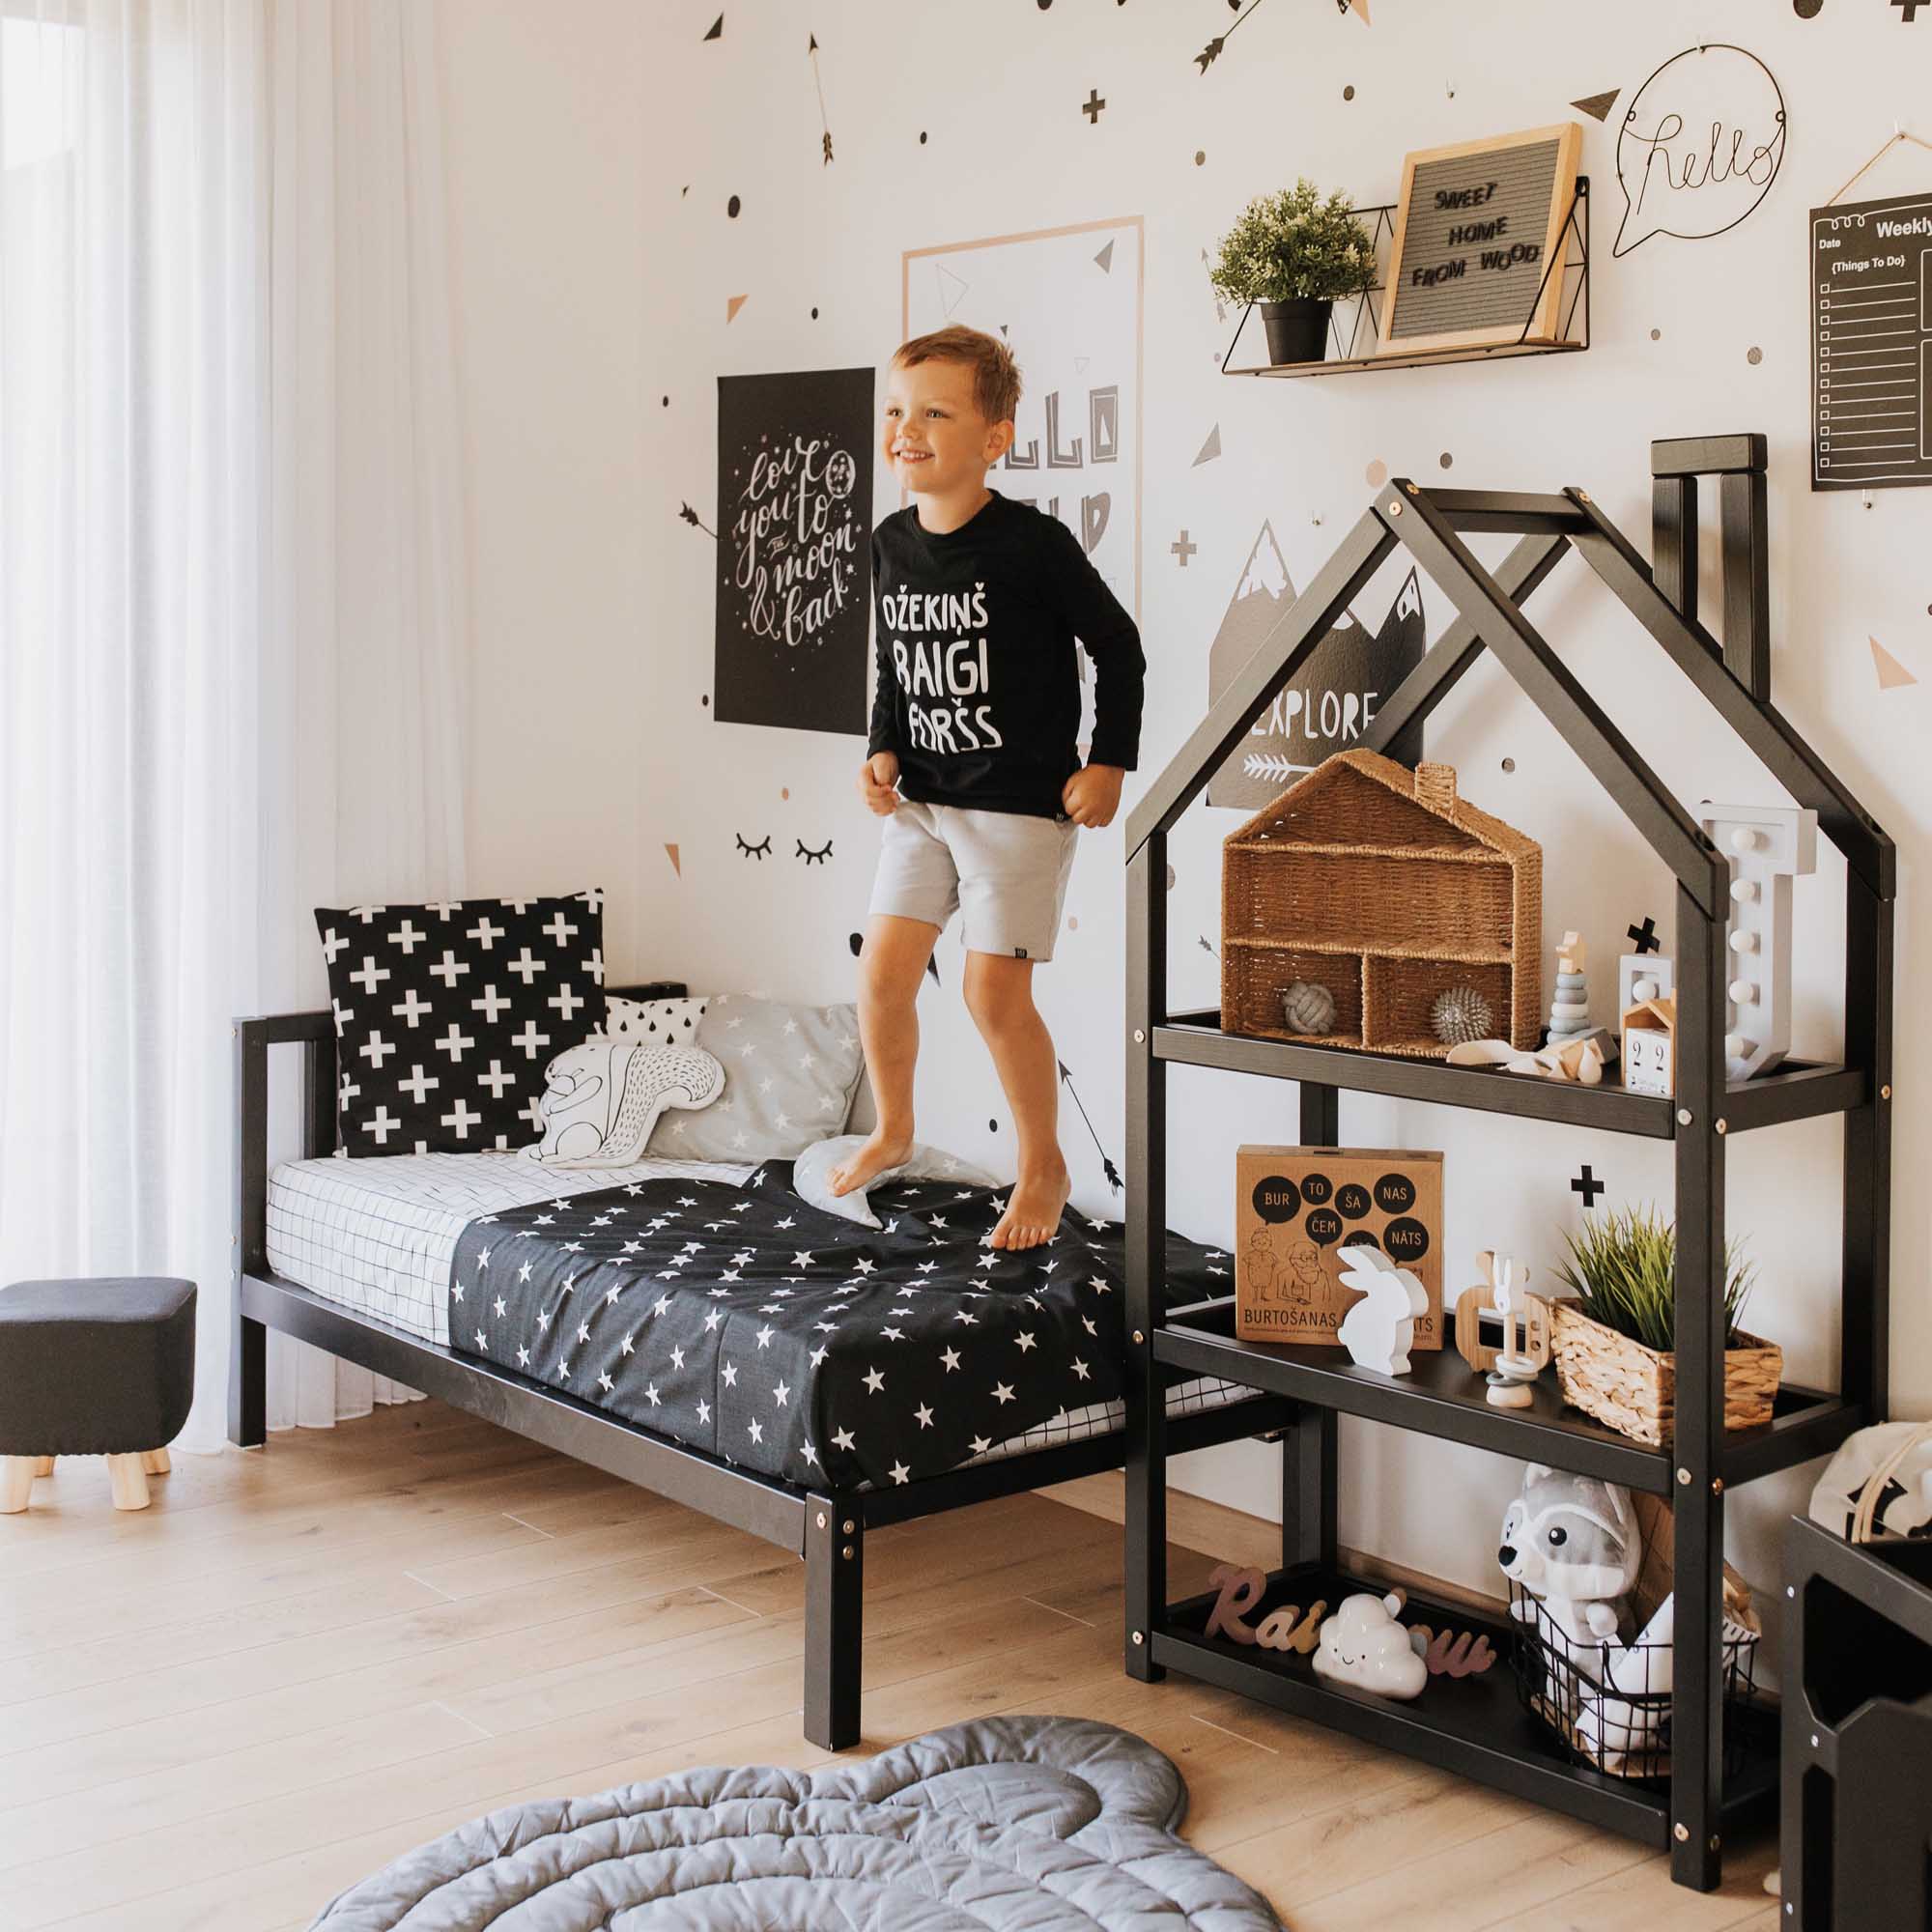 A boy's bedroom with black and white decor.